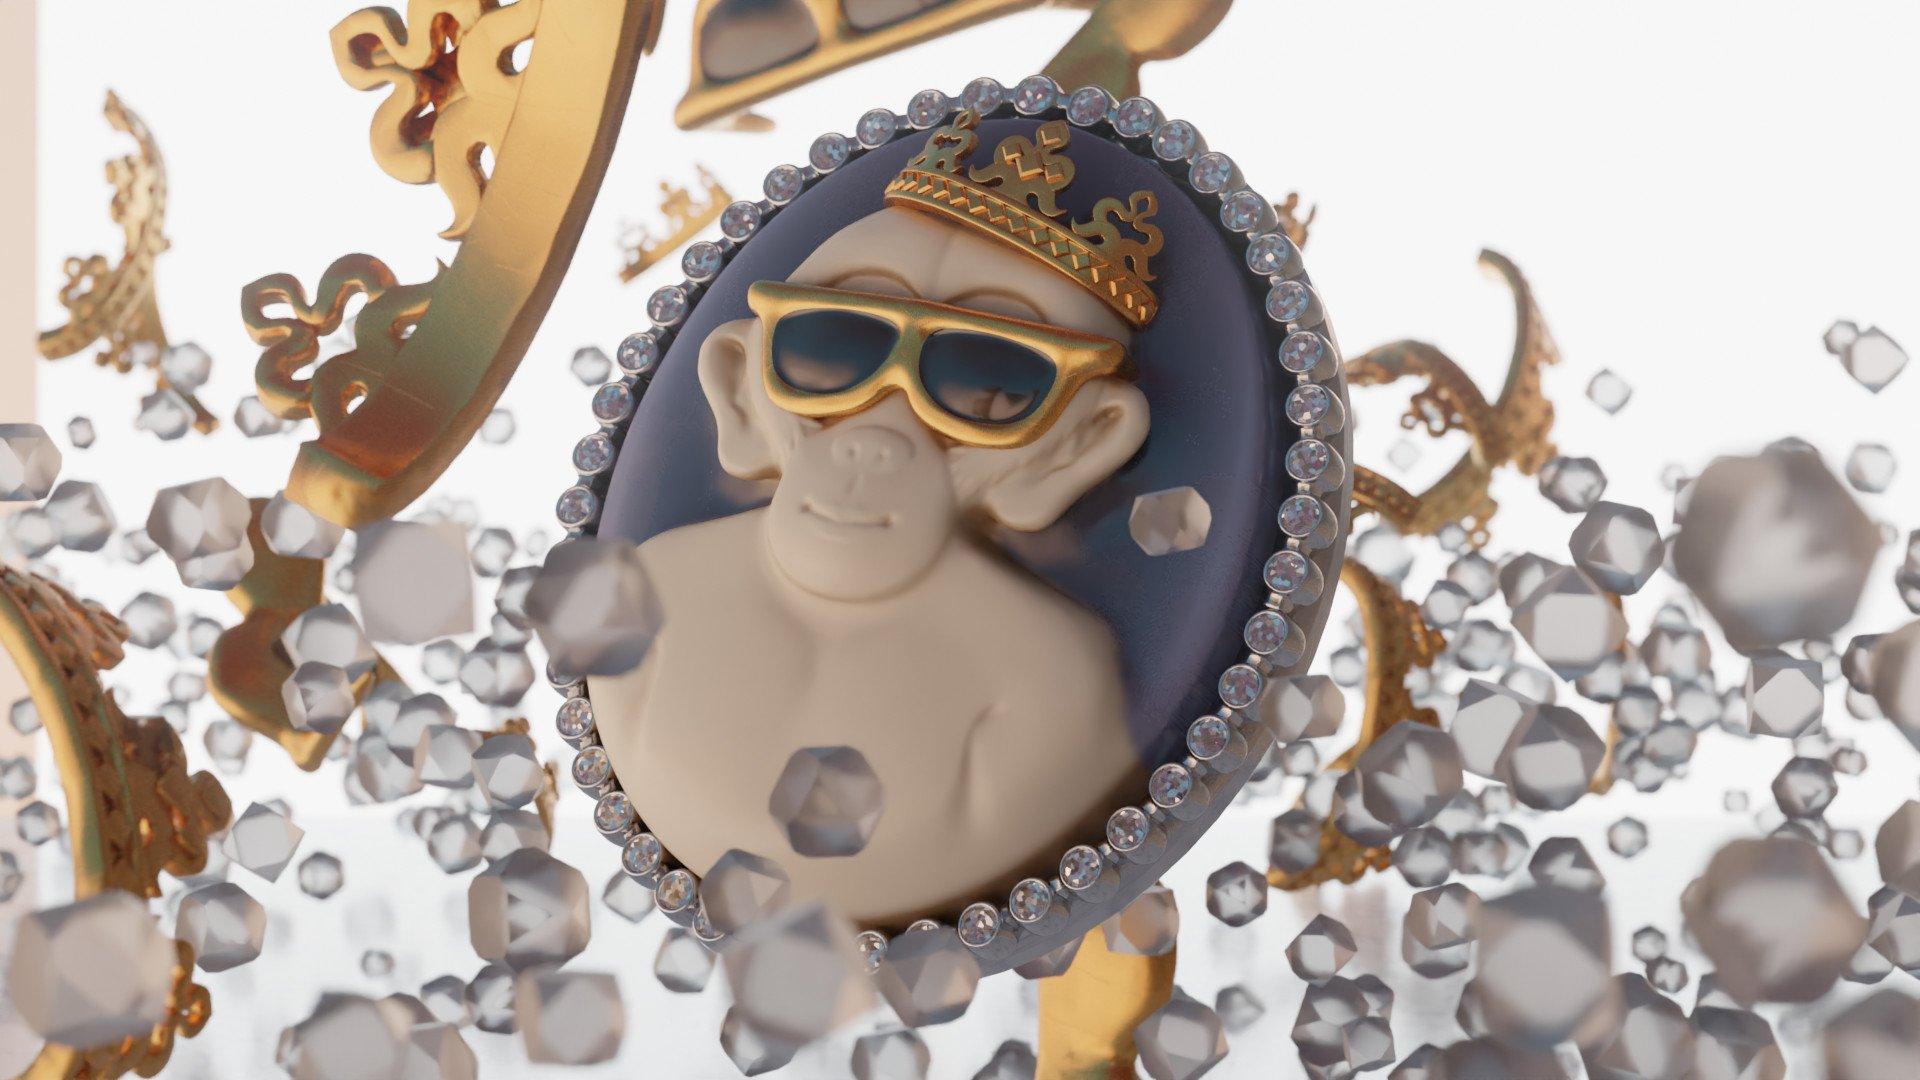 A jewellery featuring a monkey with shades